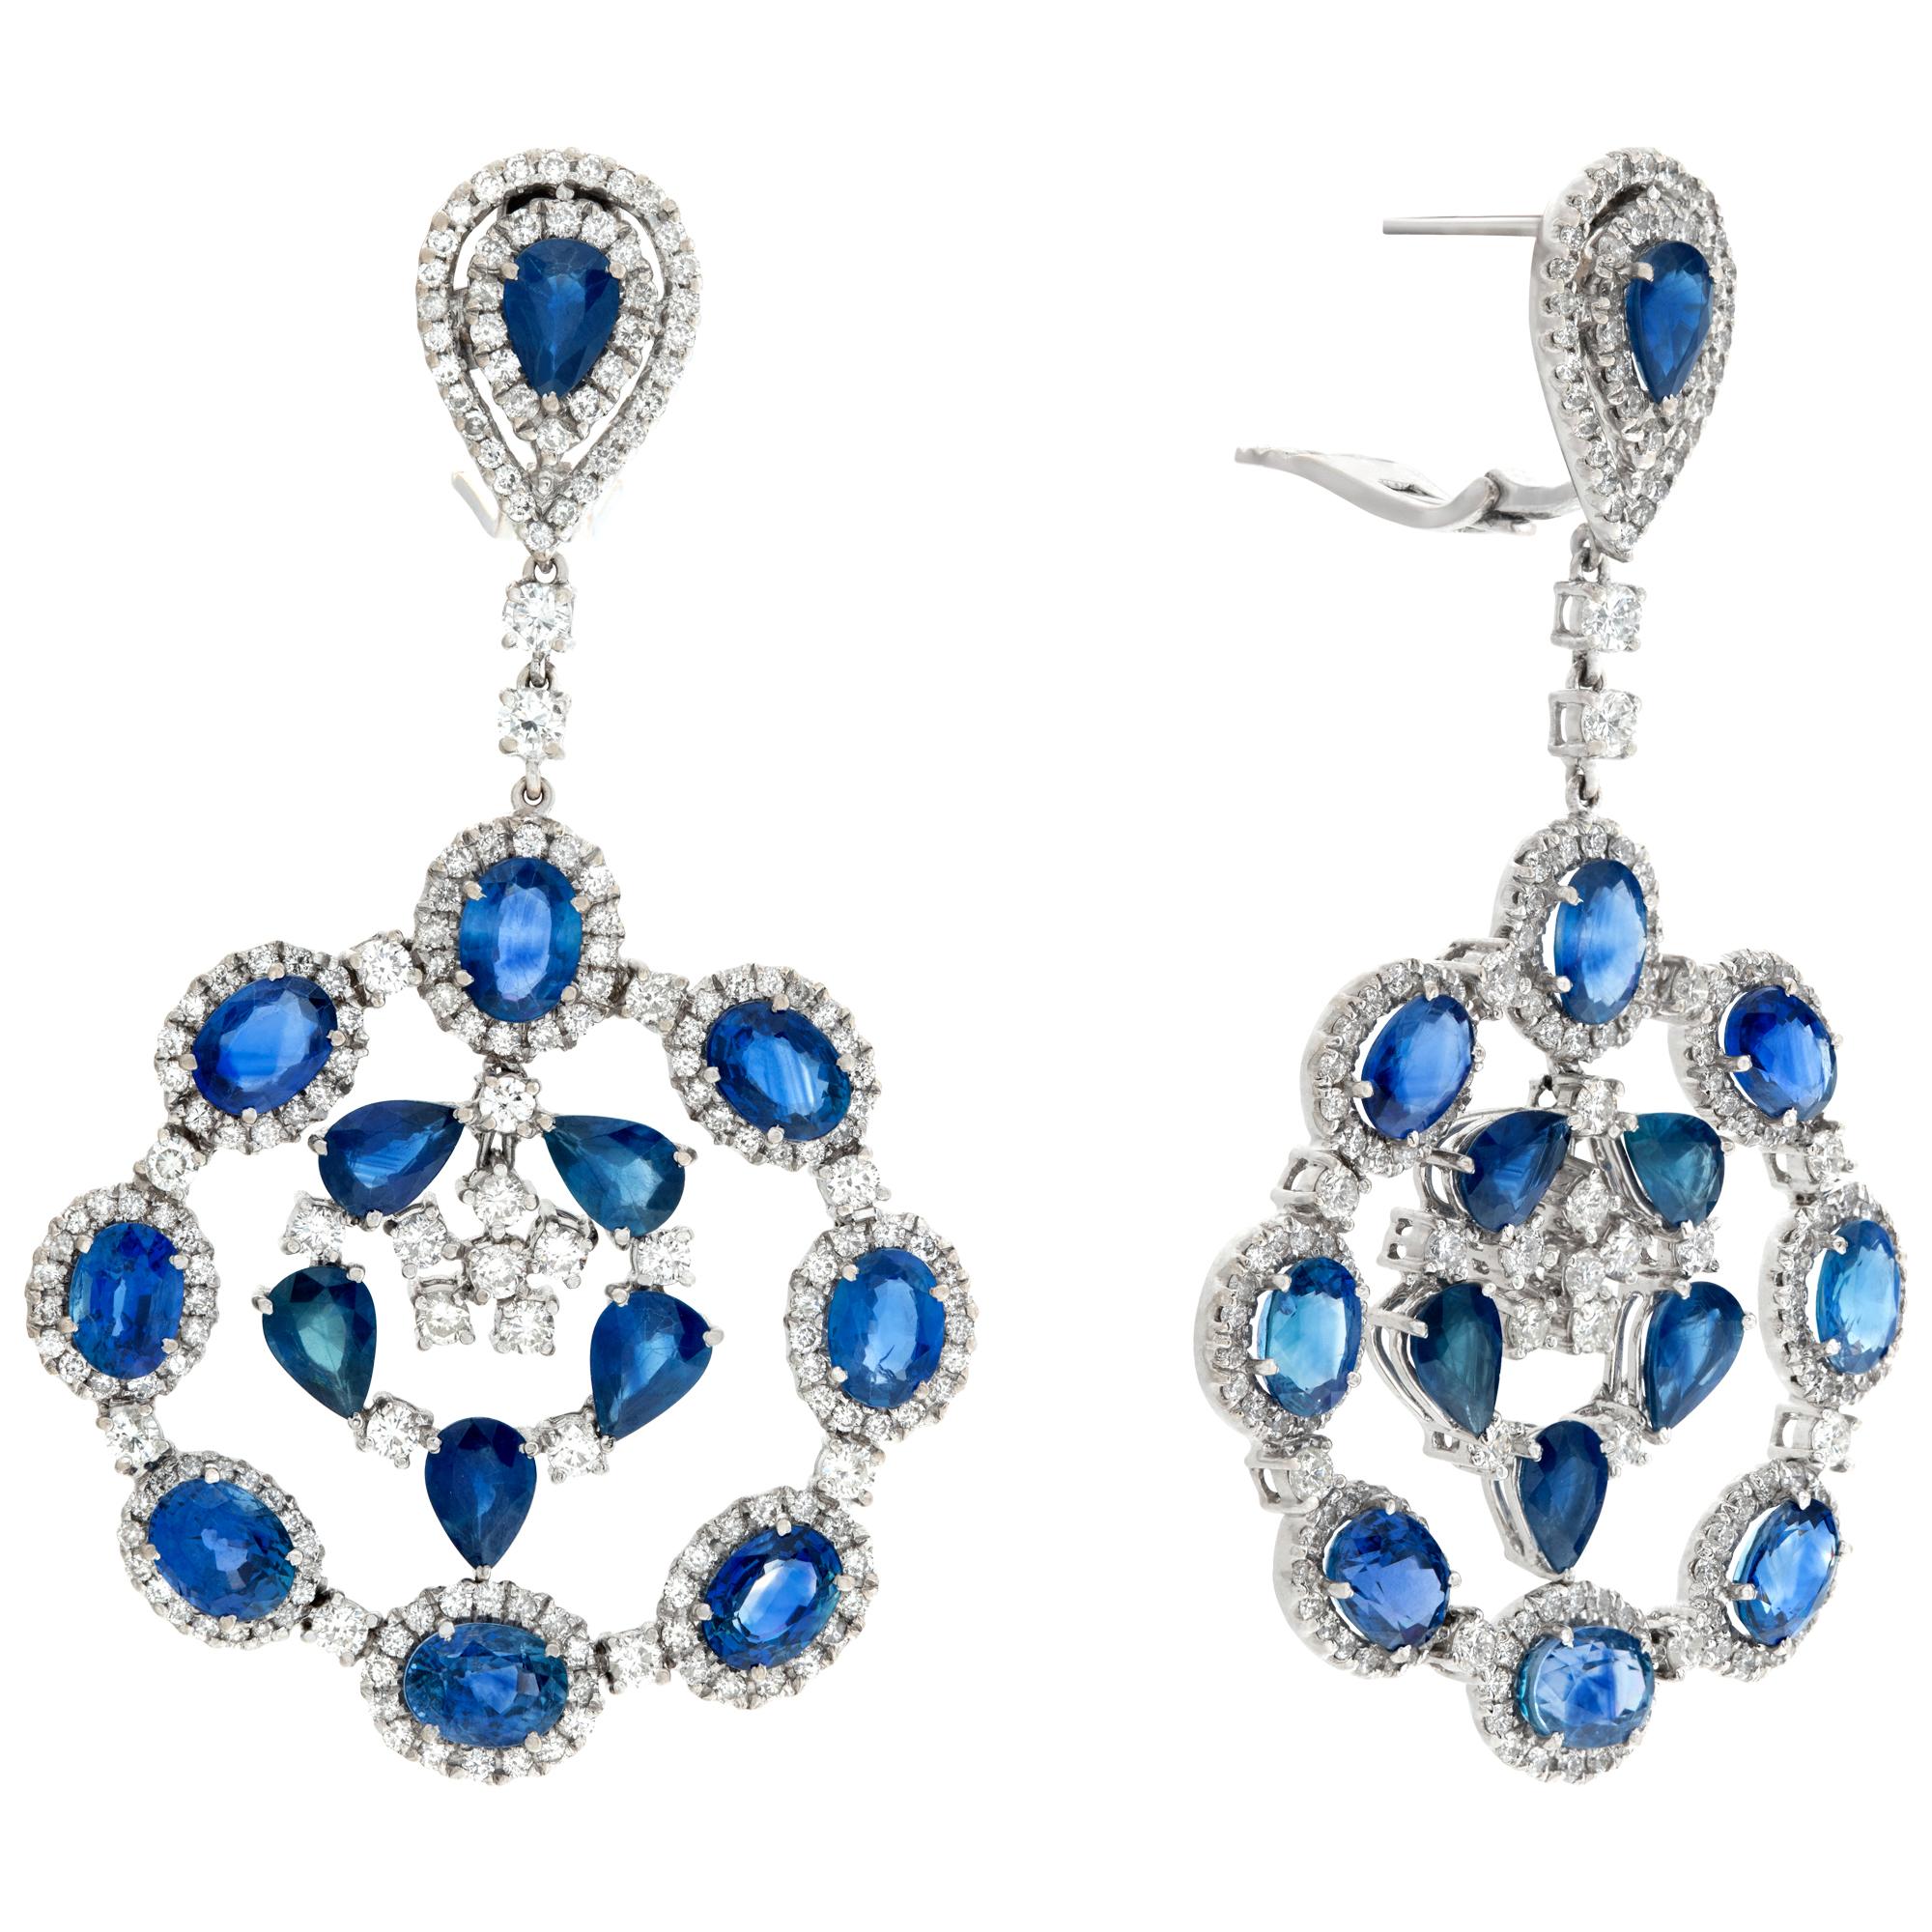 Splendid diamond and sapphire chandelier earrings in 18k white gold; 6.71 carats in round brilliant cut diamonds and 29.52 cts in oval & pear cut deep blue sapphires. 70mm length x 41 mm width.
